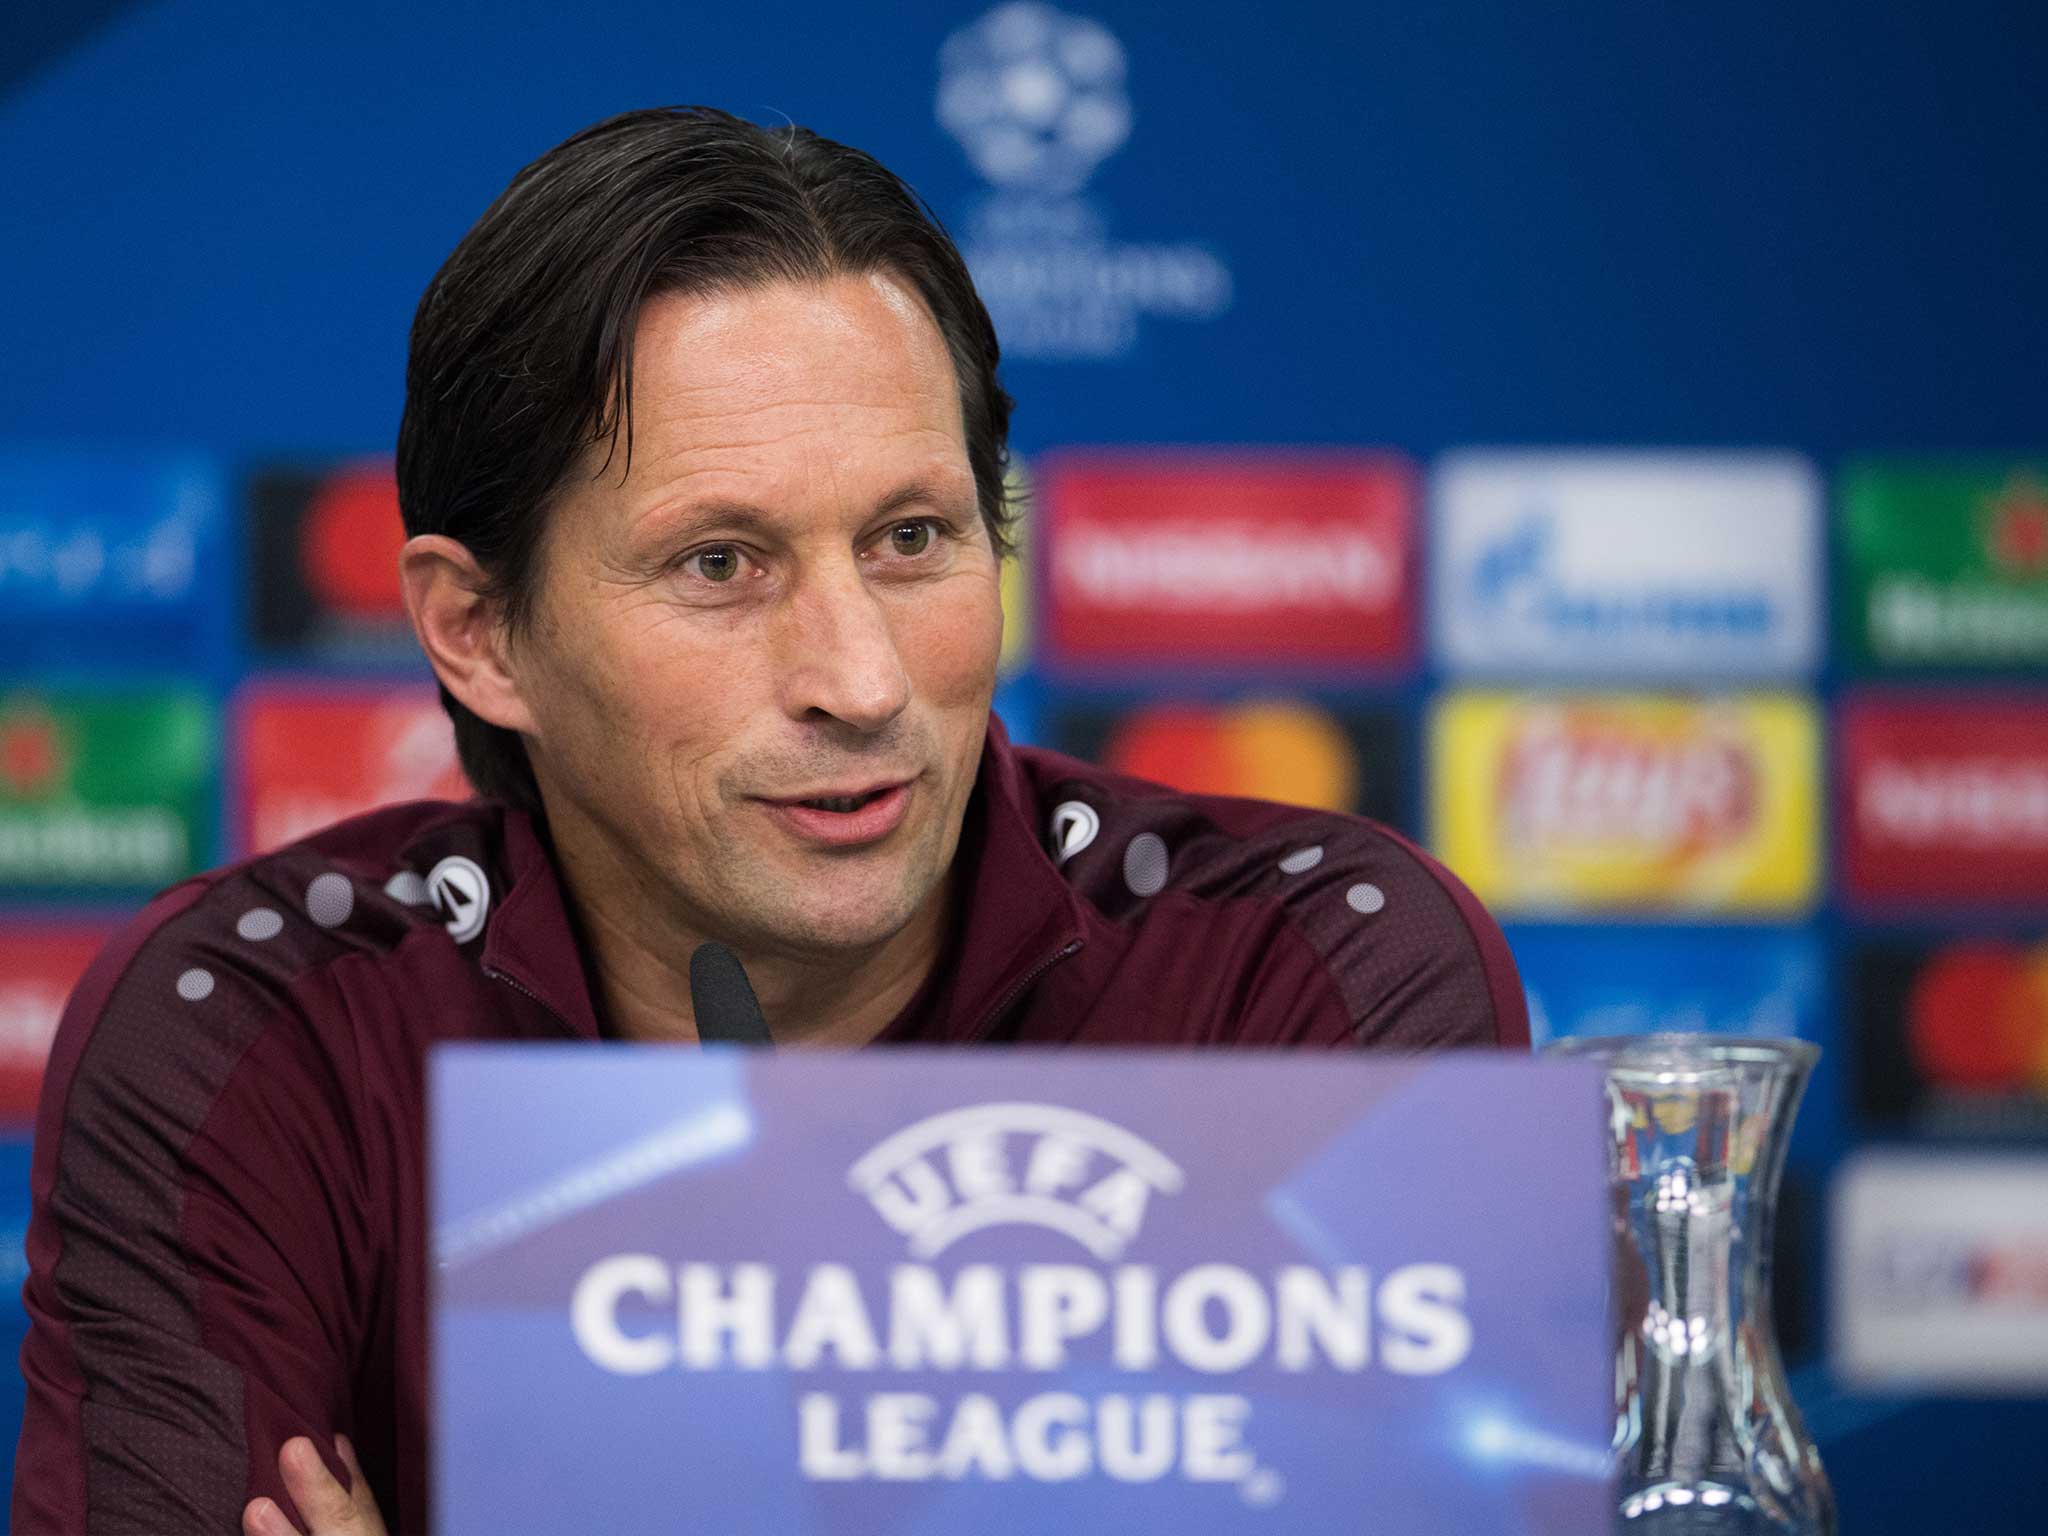 Roger Schmidt speaks to the media ahead of the clash with Tottenham